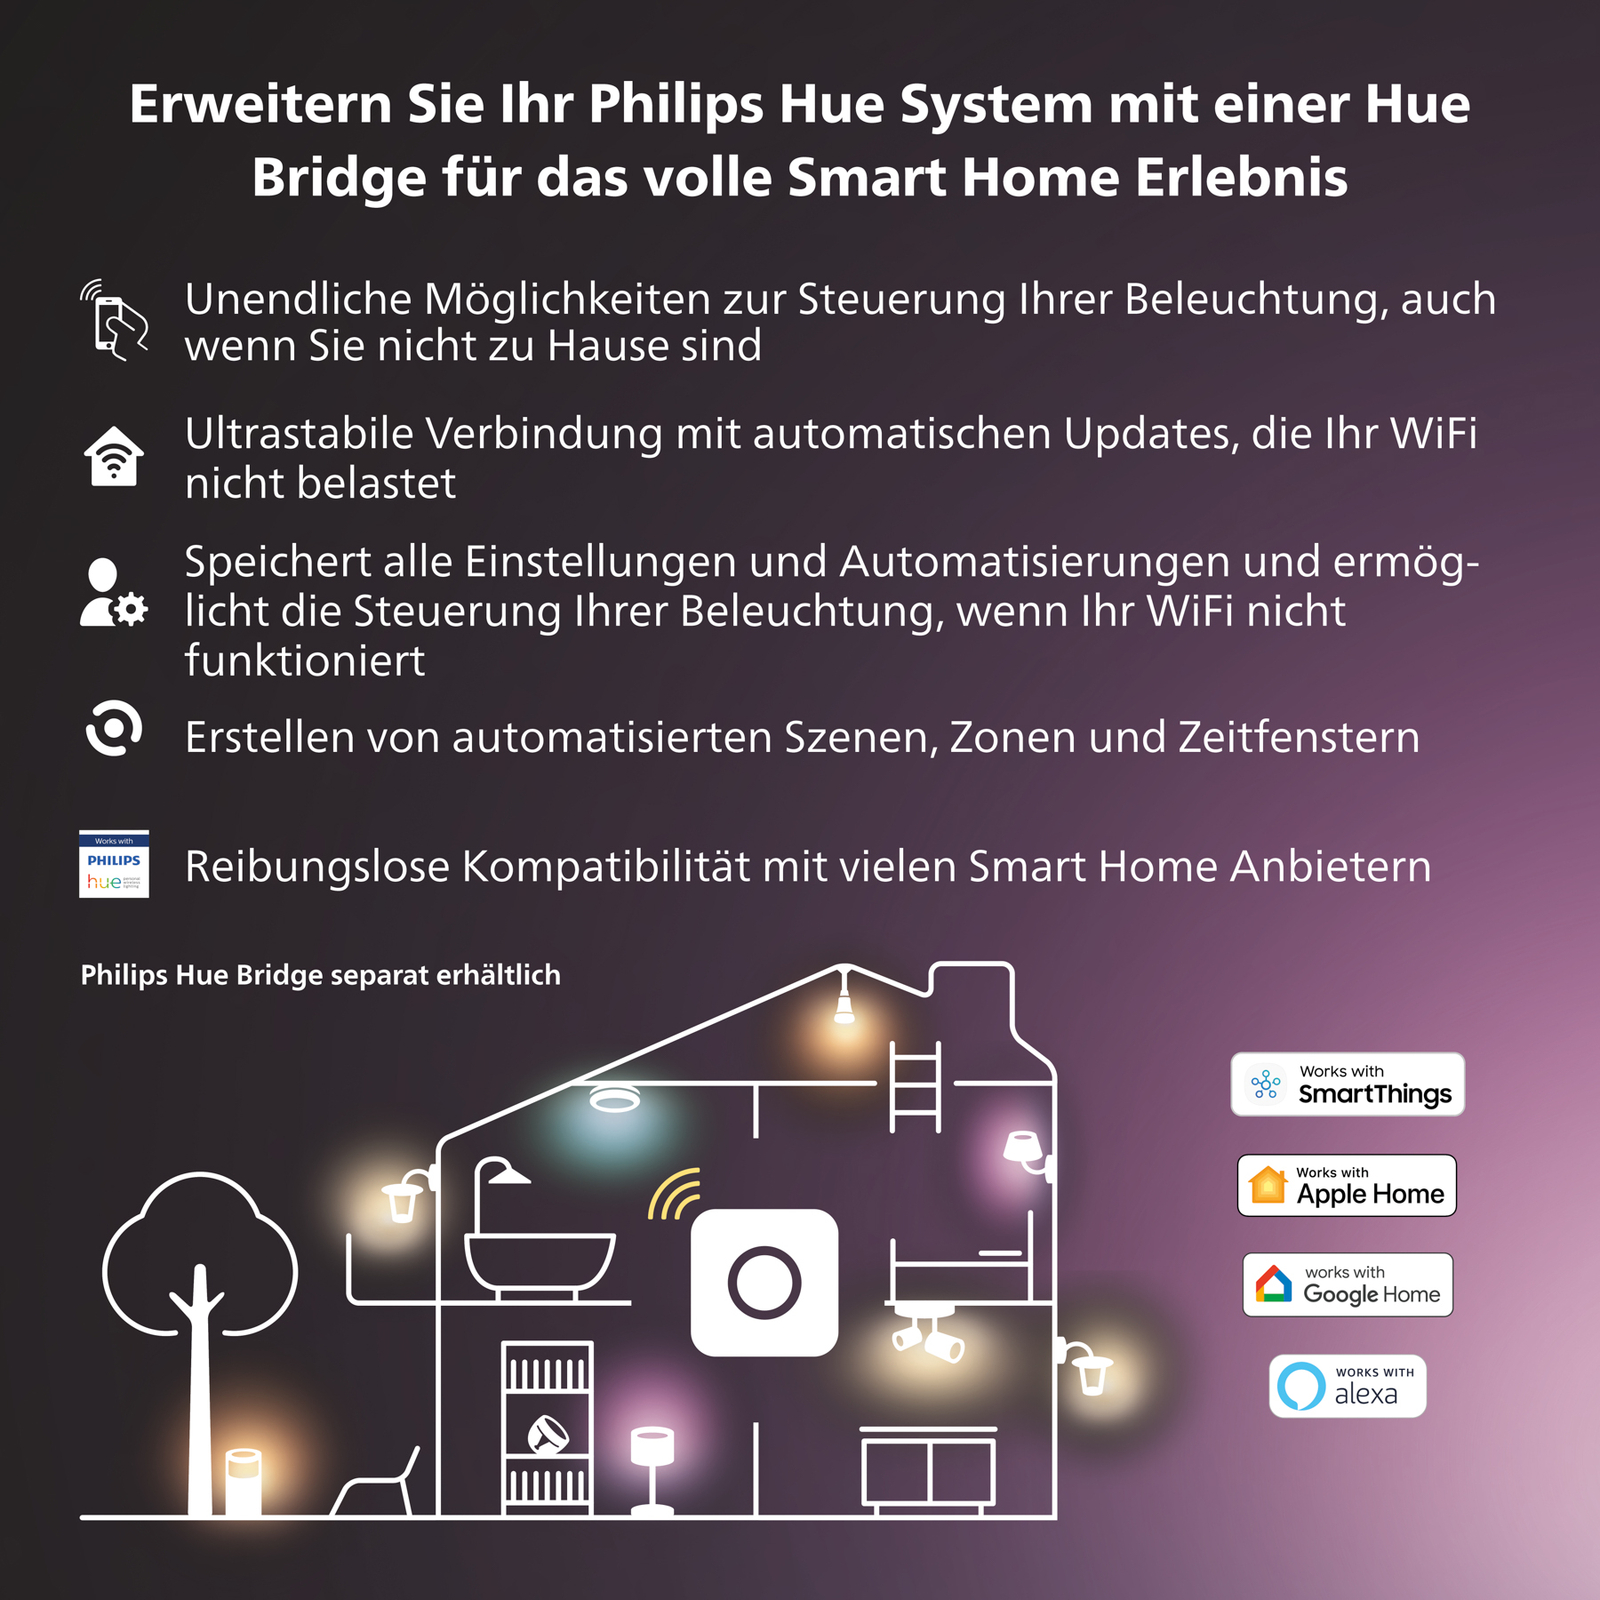 Philips Hue White&Color Ambiance E27 9W 1100lm 2x